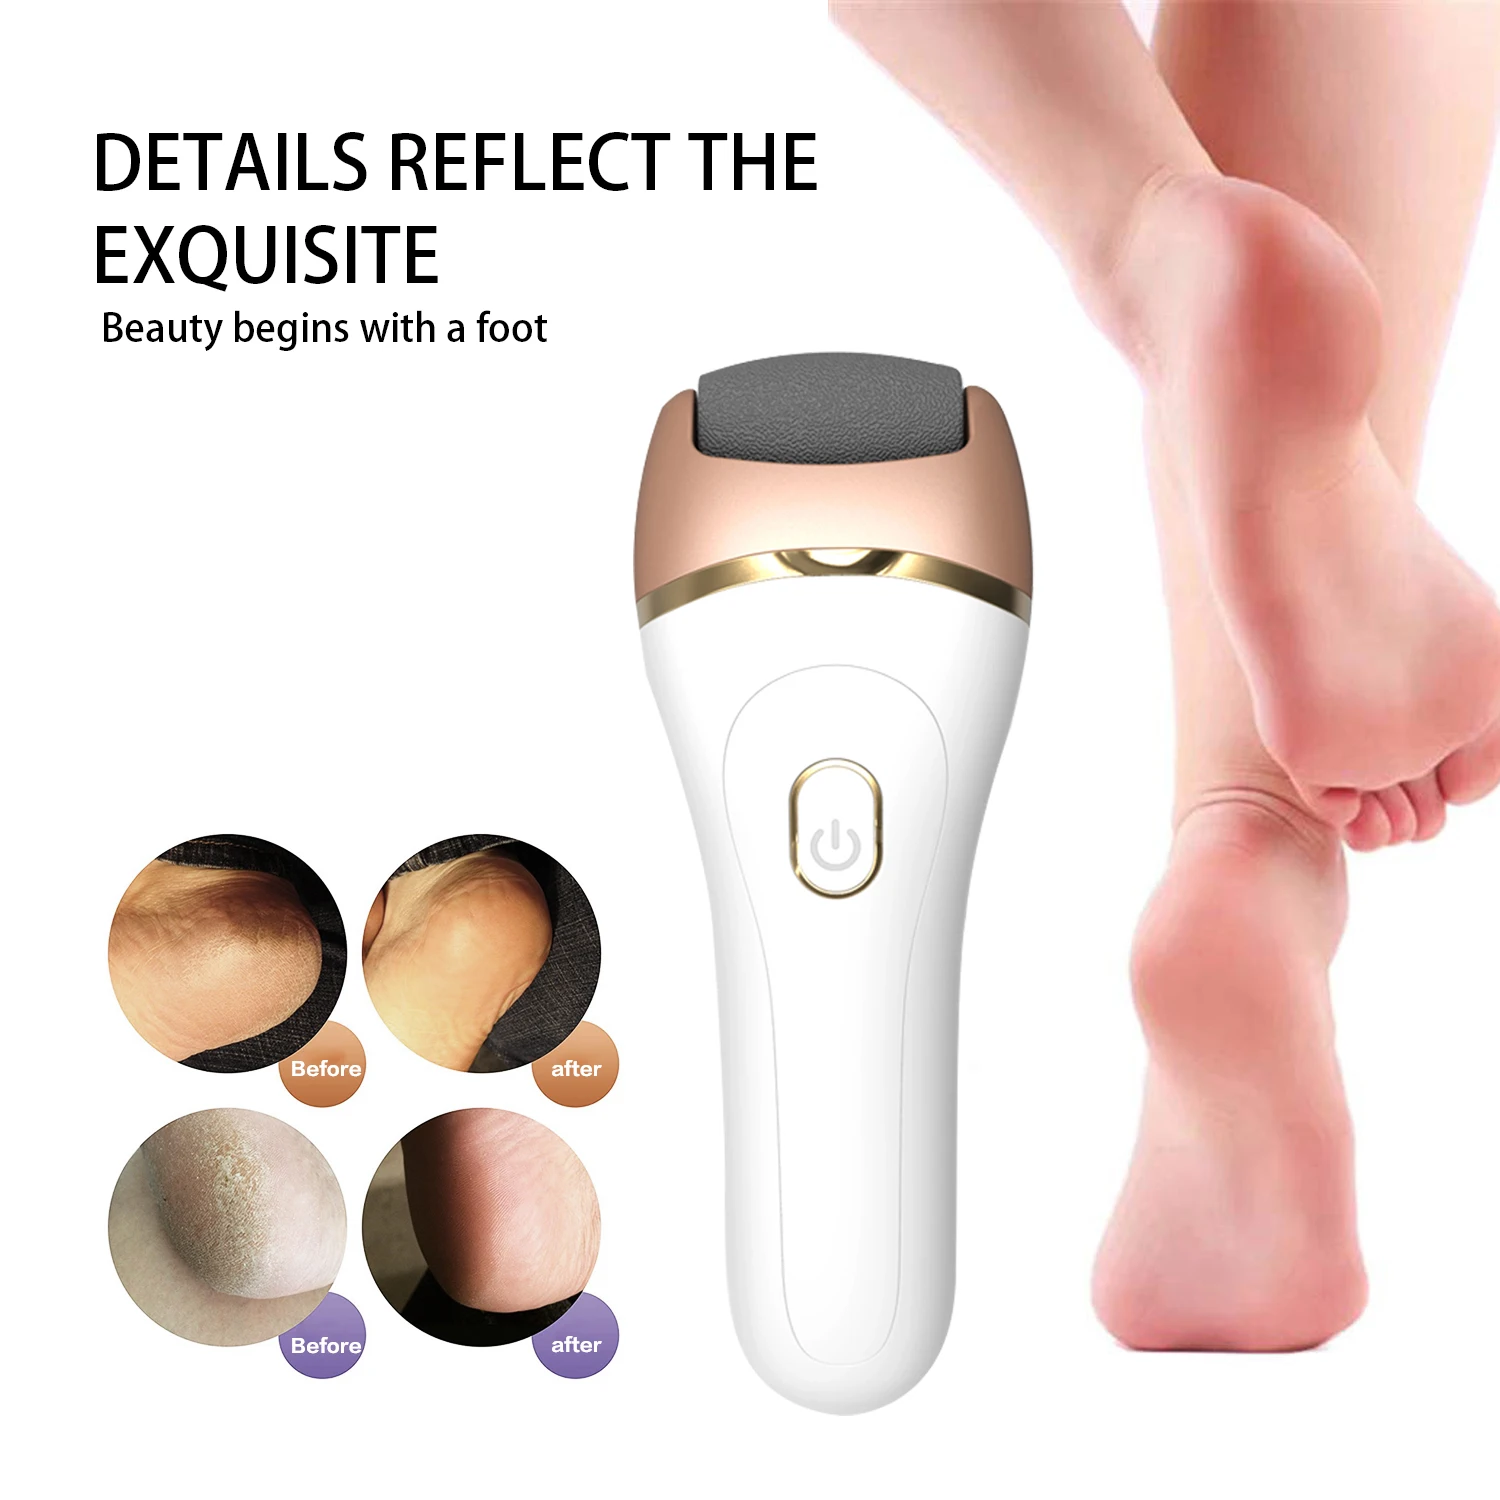 

Electric Foot Callus Remover Rechargeable Pedicure Tools for Men Best Professional Spa Electronic Micro Pedi Feet File Care